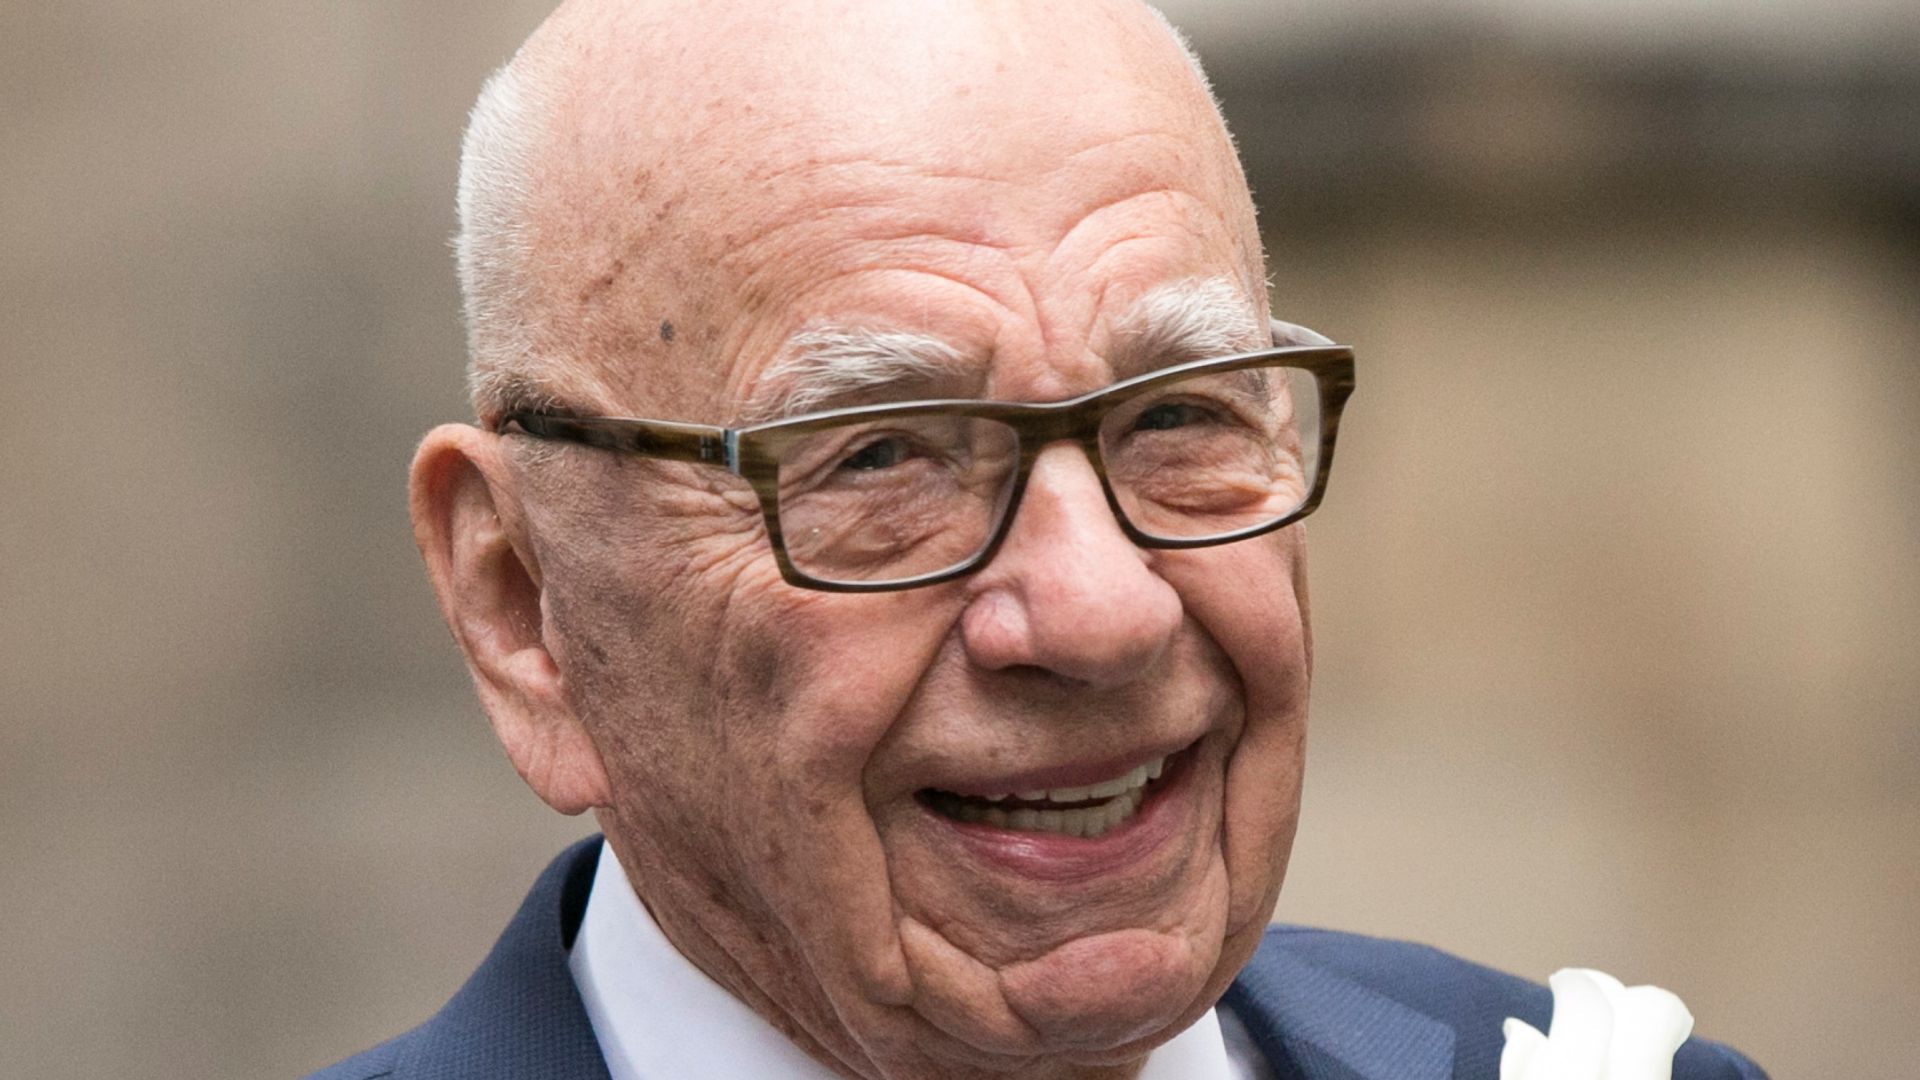 Rupert Murdoch's children: Who are they and who will take on chairman role?